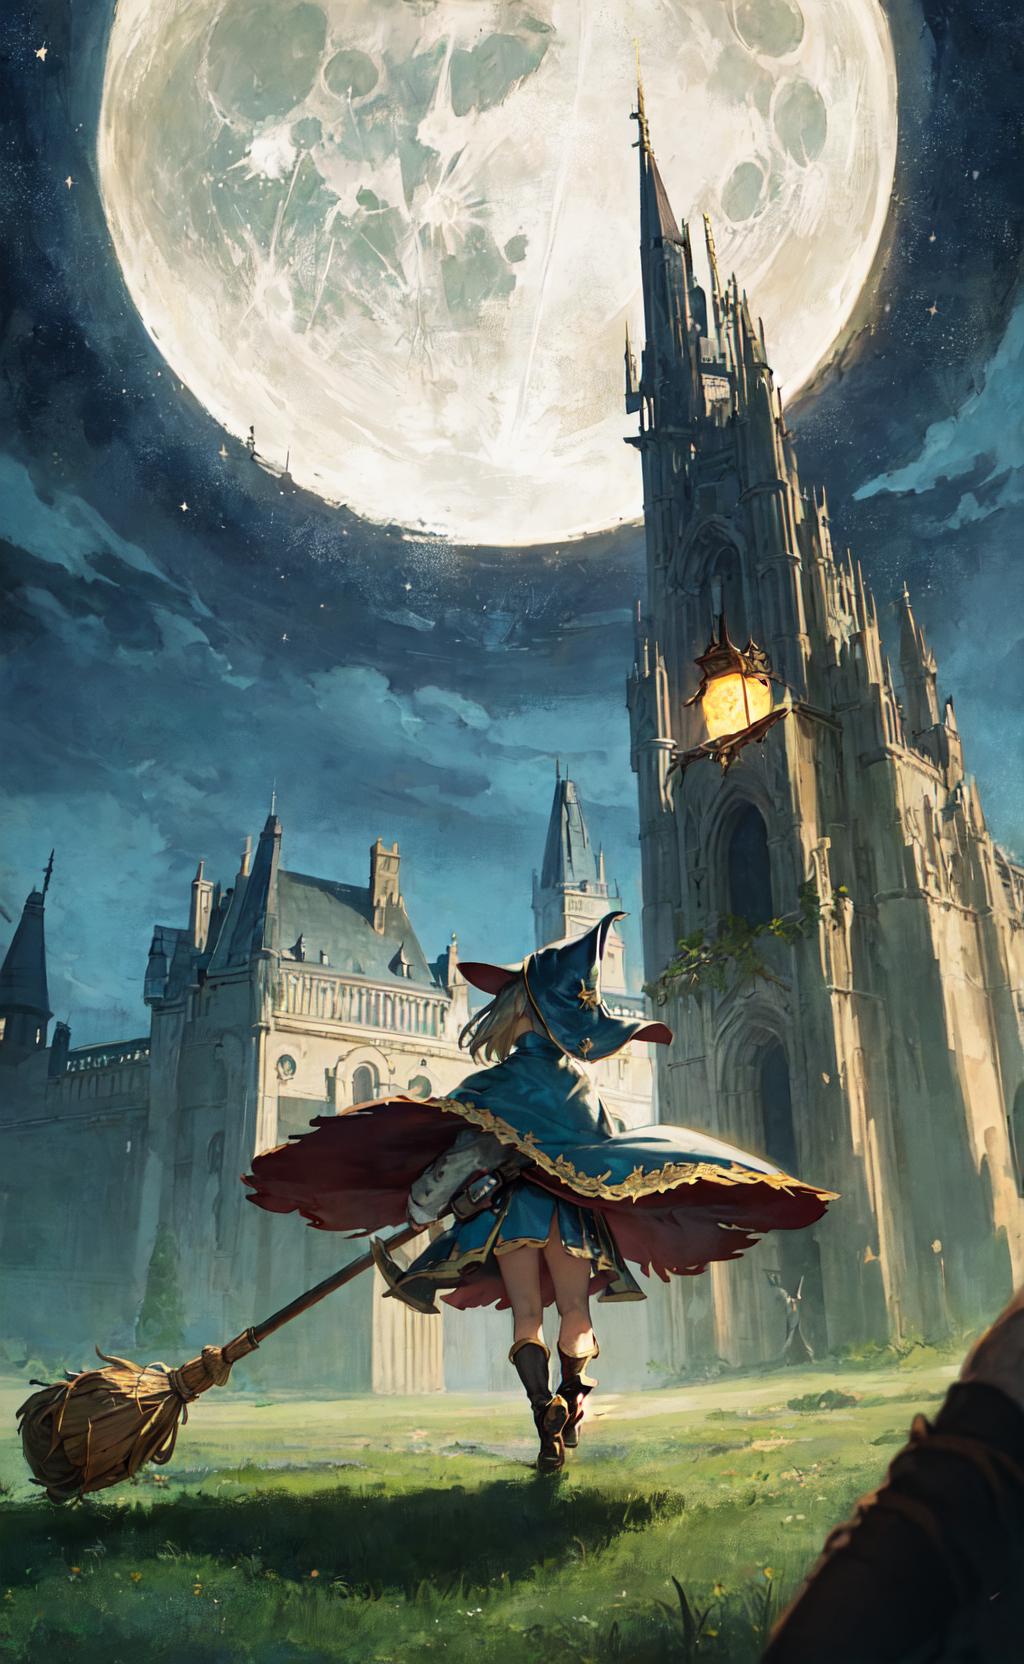 A painting of a woman wearing a blue dress, holding a sword, and looking at a building under a moonlit sky.